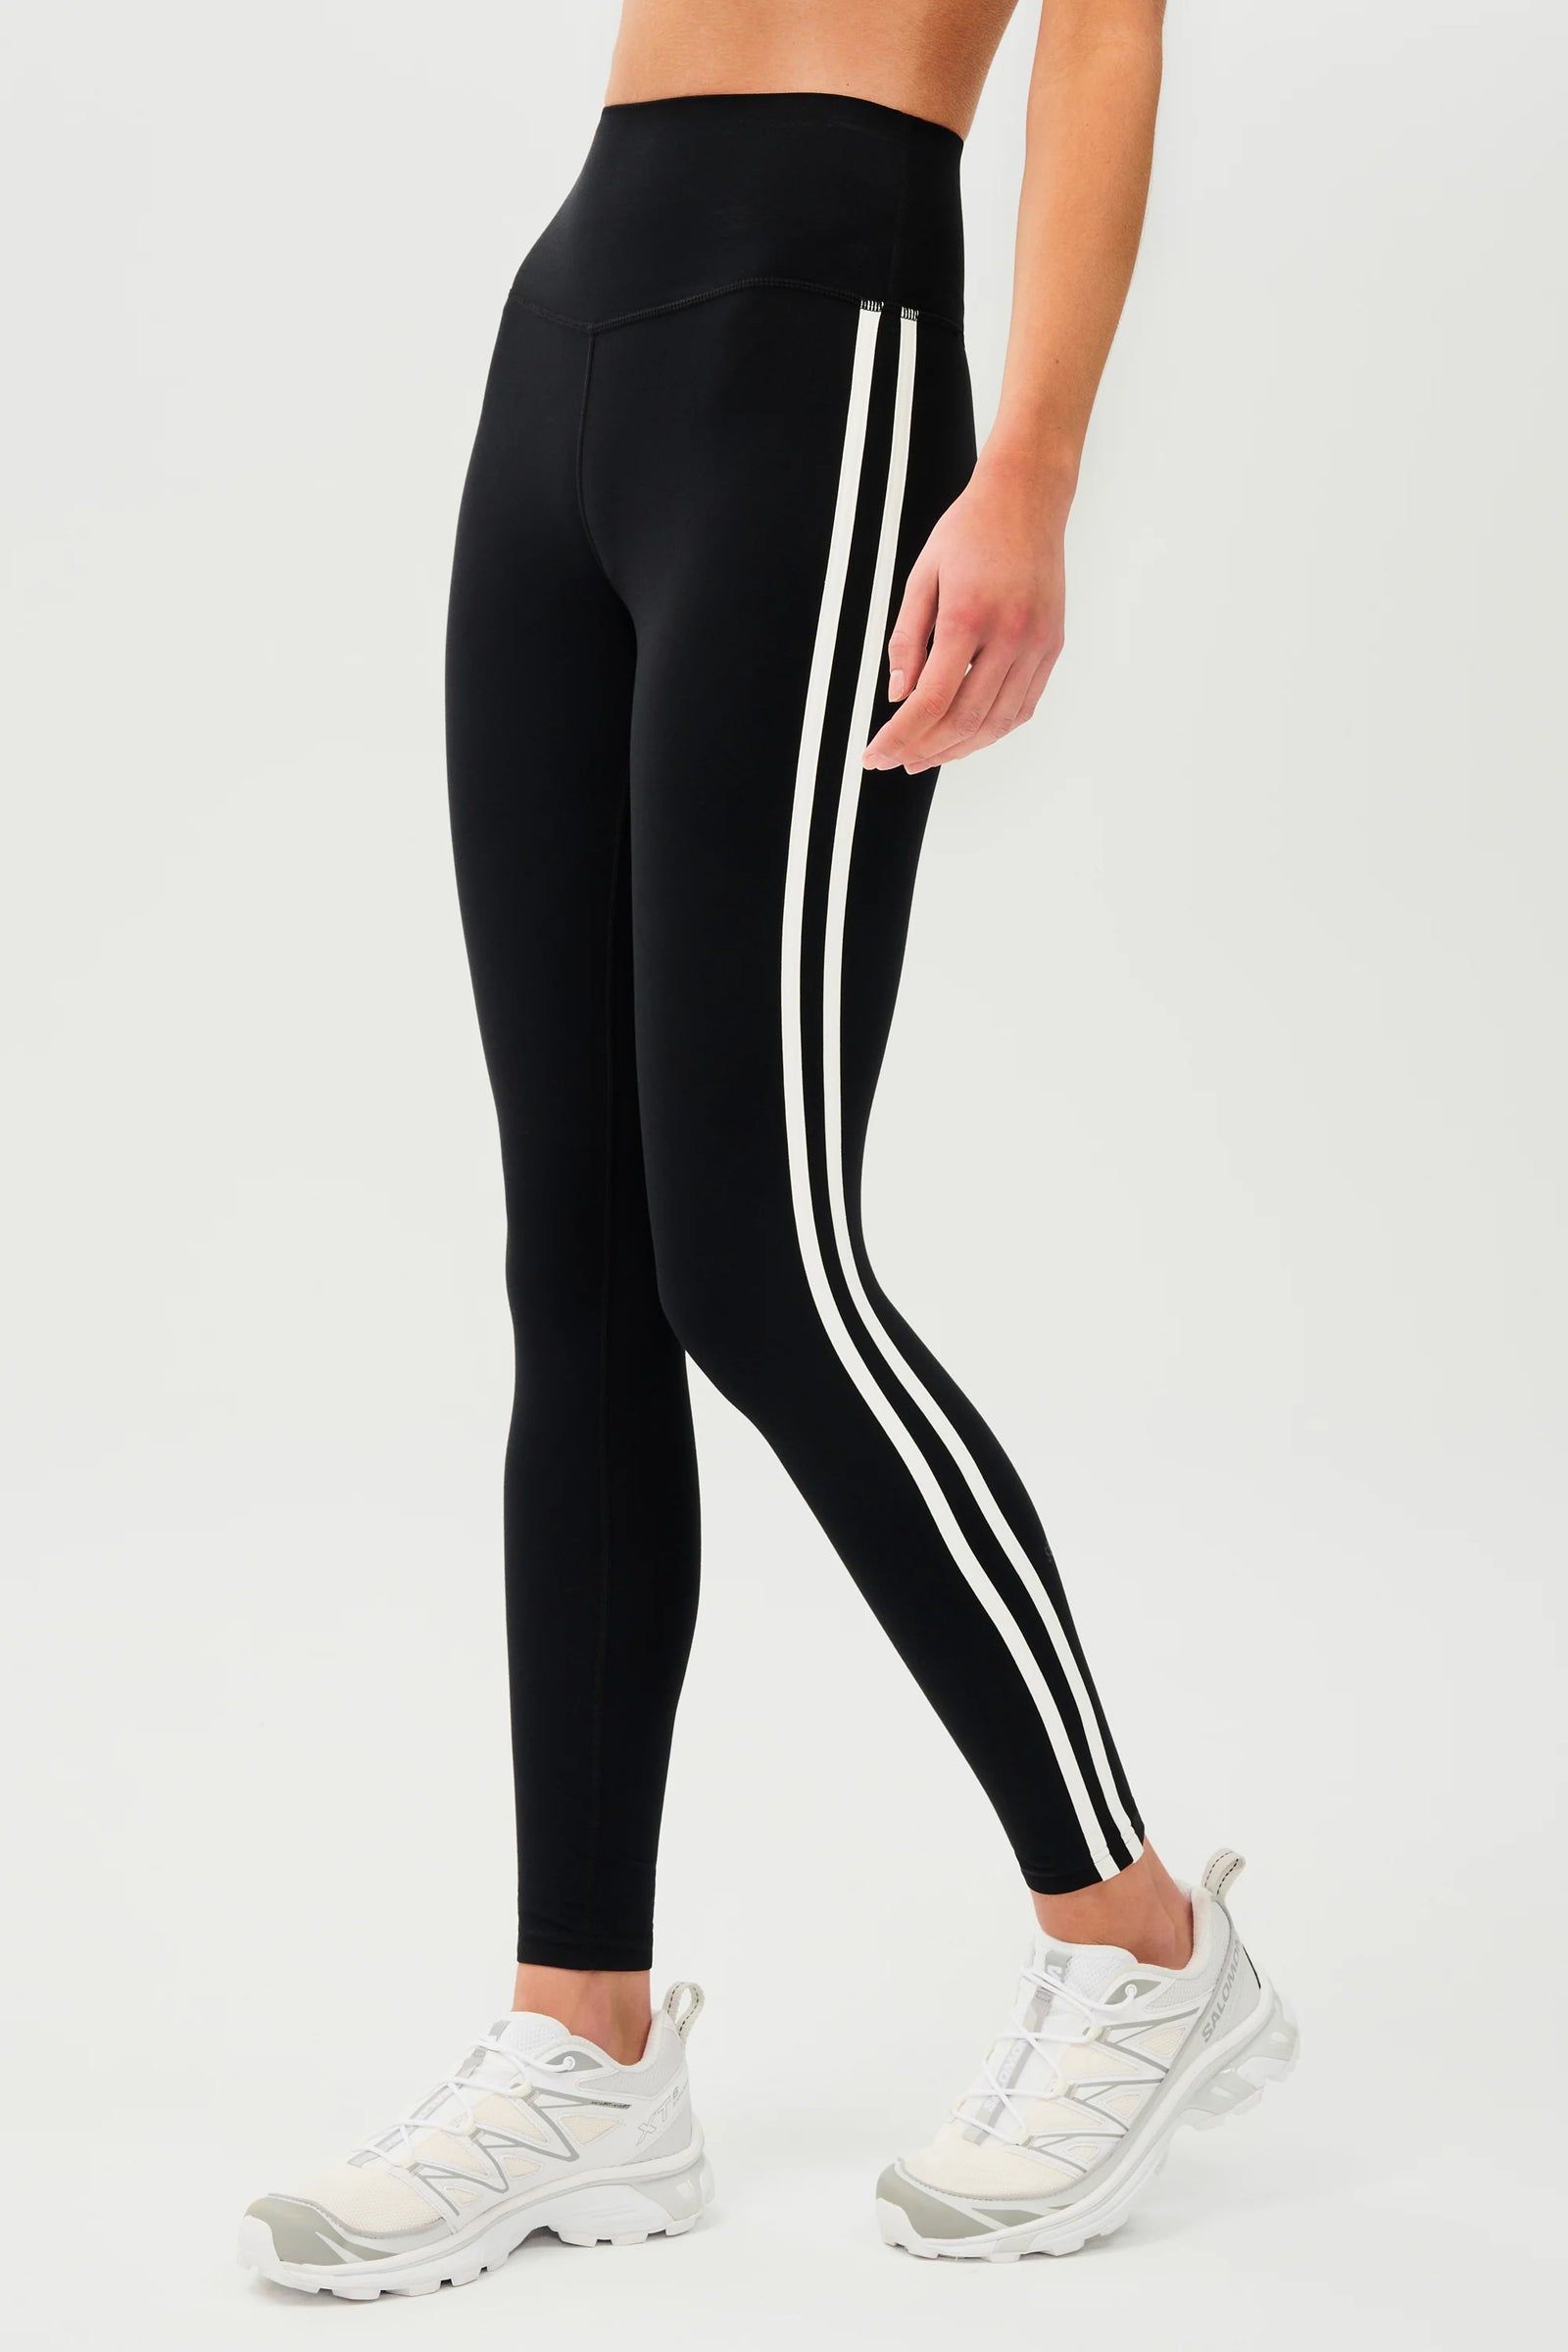 Splits59 Raquel High-Waisted Airweight Flare Leggings  Anthropologie Japan  - Women's Clothing, Accessories & Home